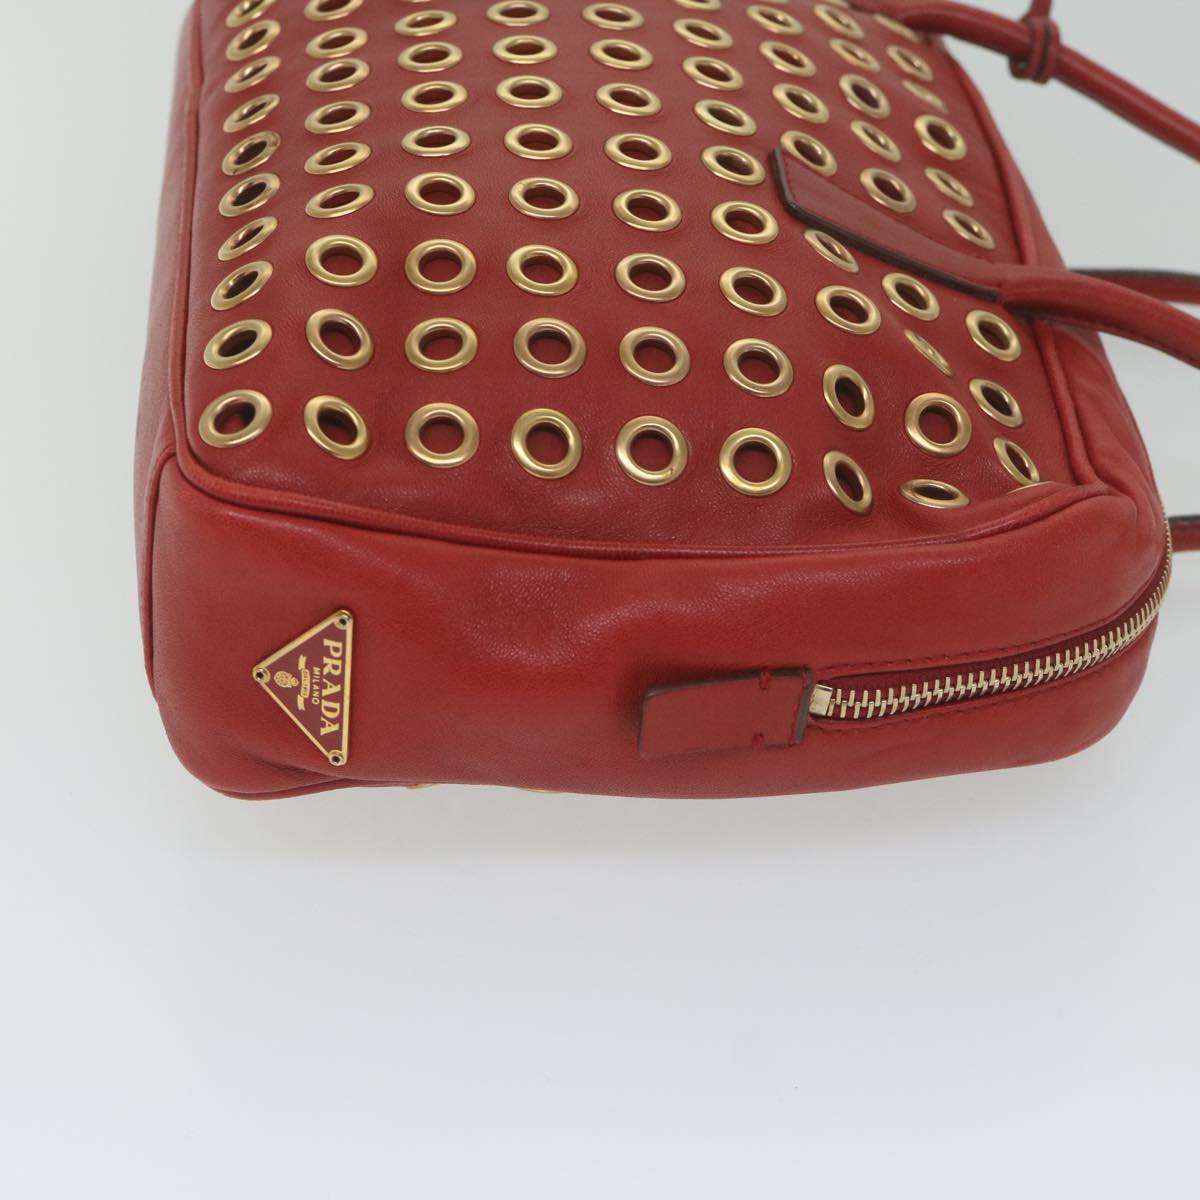 PRADA Hand Bag Leather Red Auth 61414